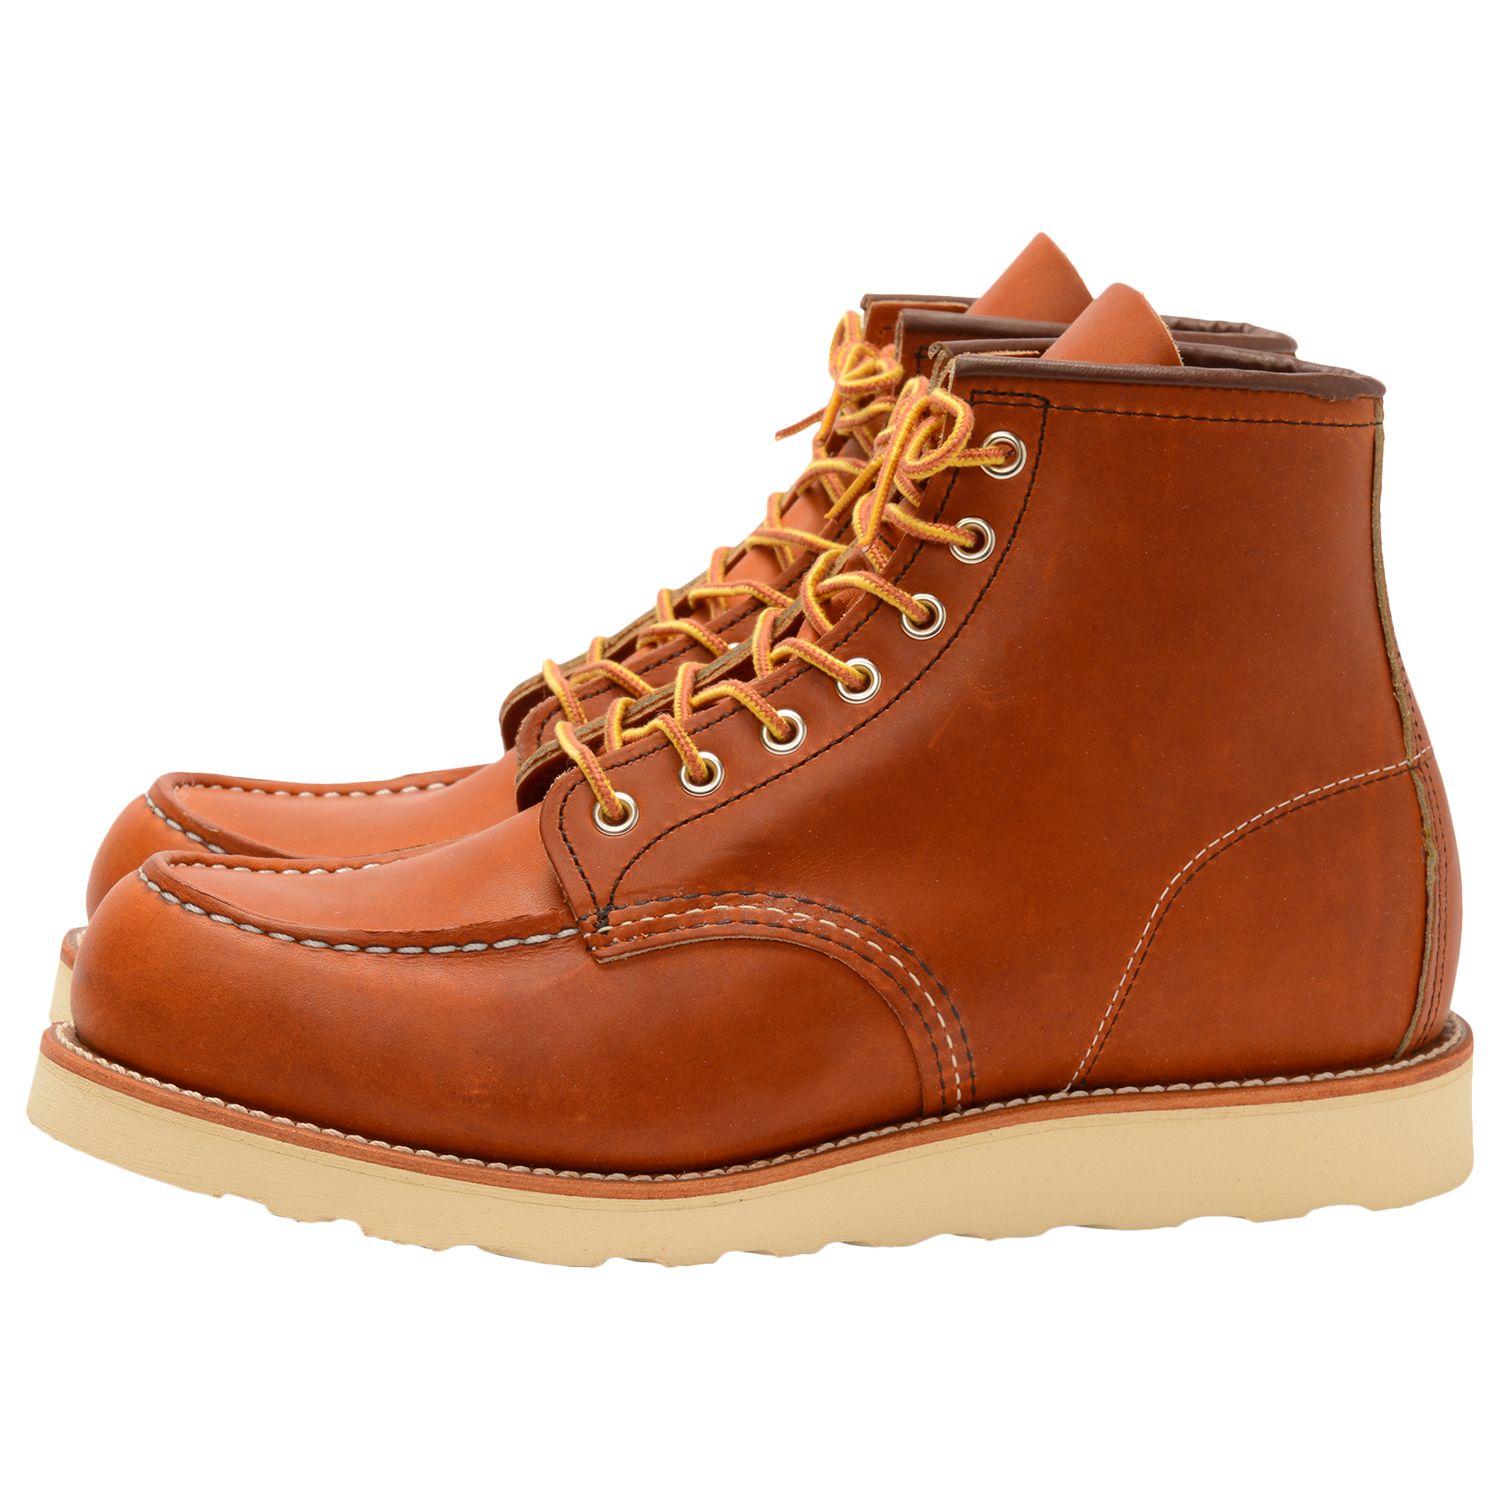 Red Wing 875 Moc Toe Boot, Oro Legacy at John Lewis & Partners